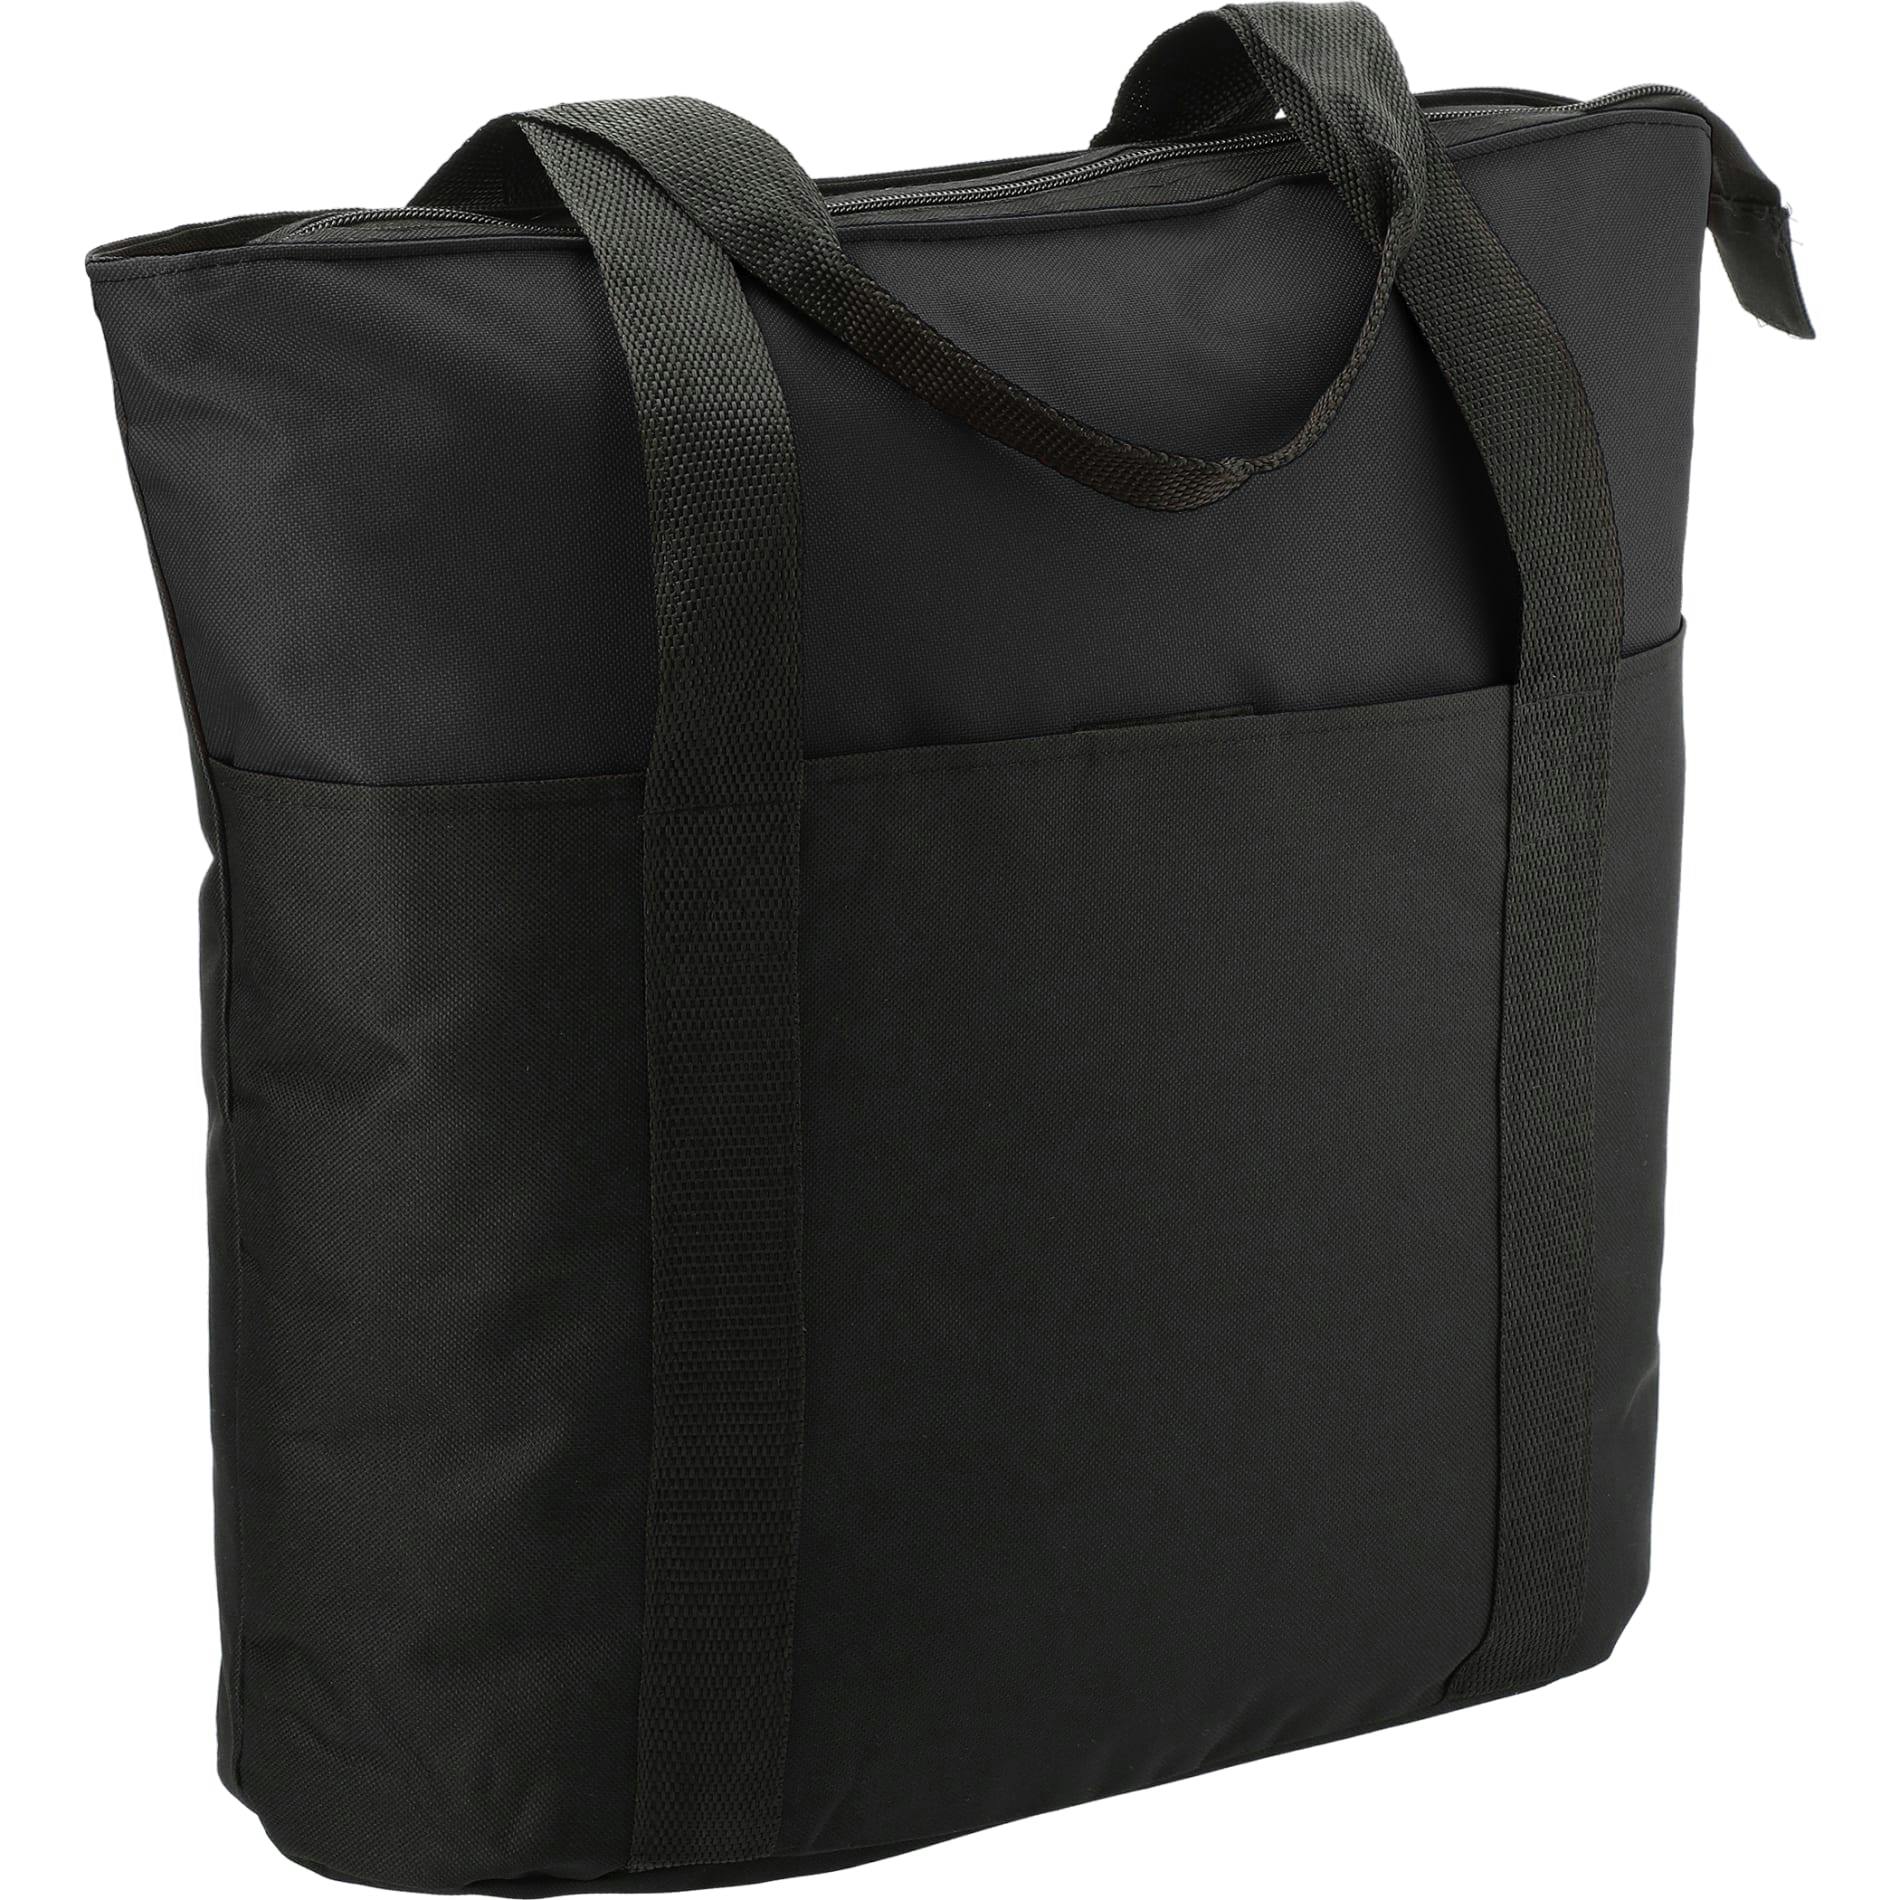 Heavy Duty Zippered Convention Tote - additional Image 2